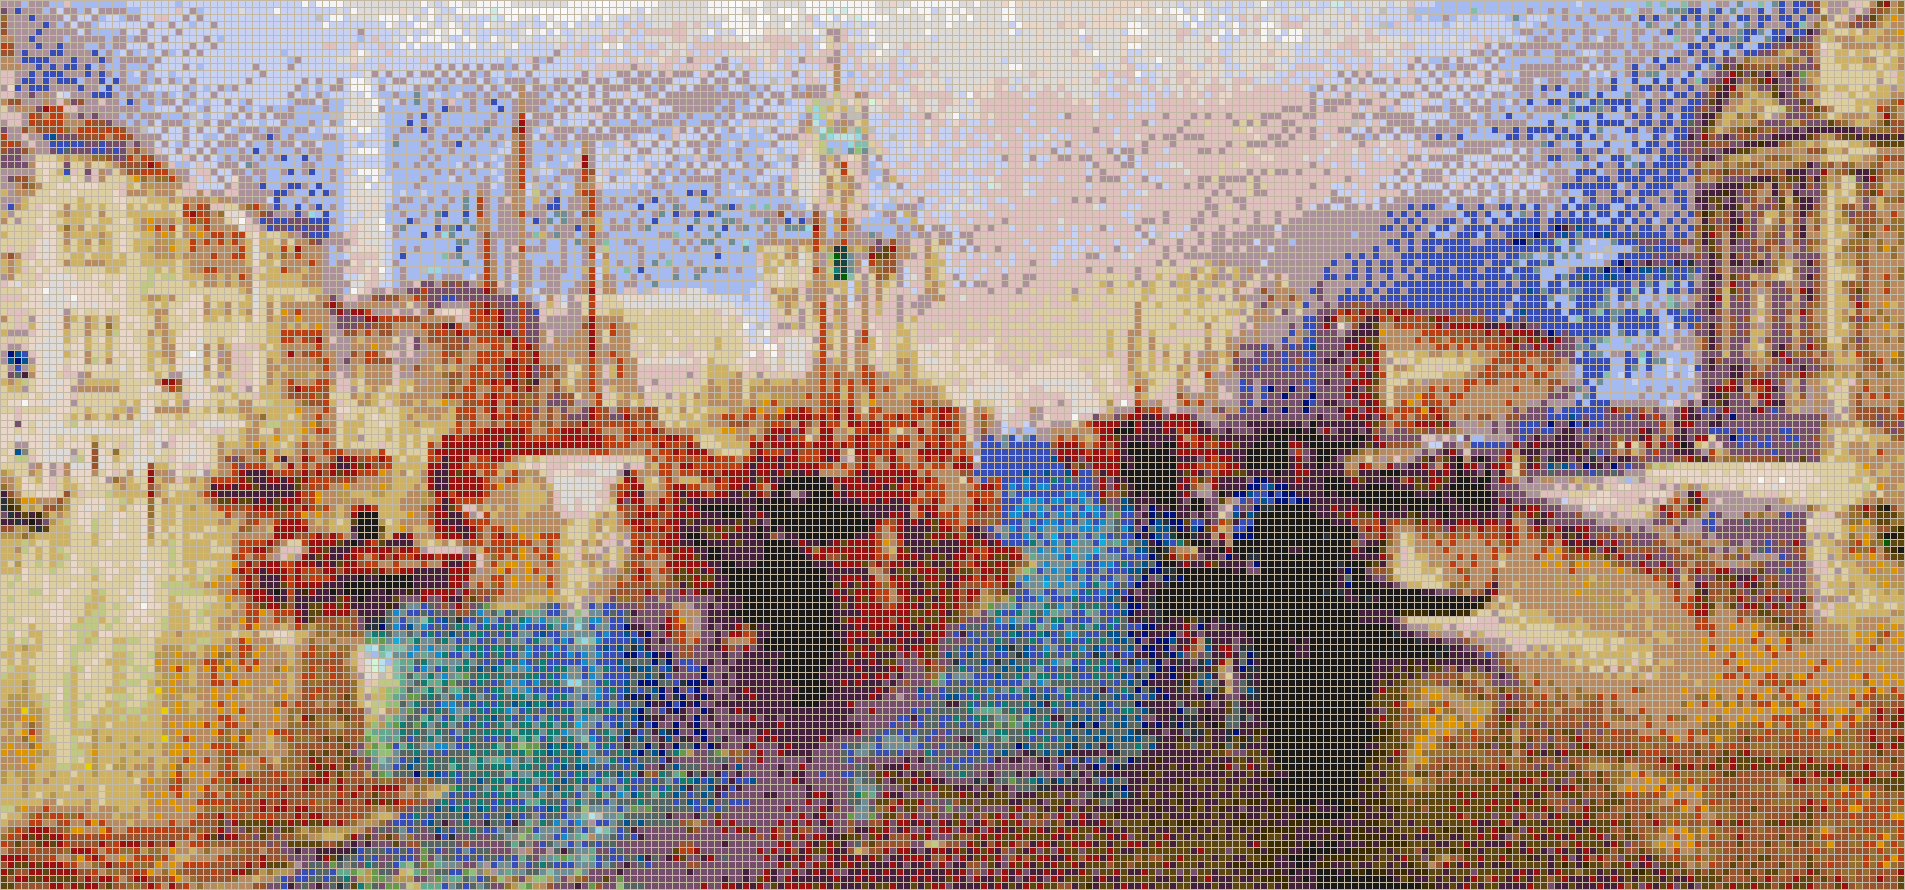 The Grand Canal, Venice (Turner) - Mosaic Tile Art